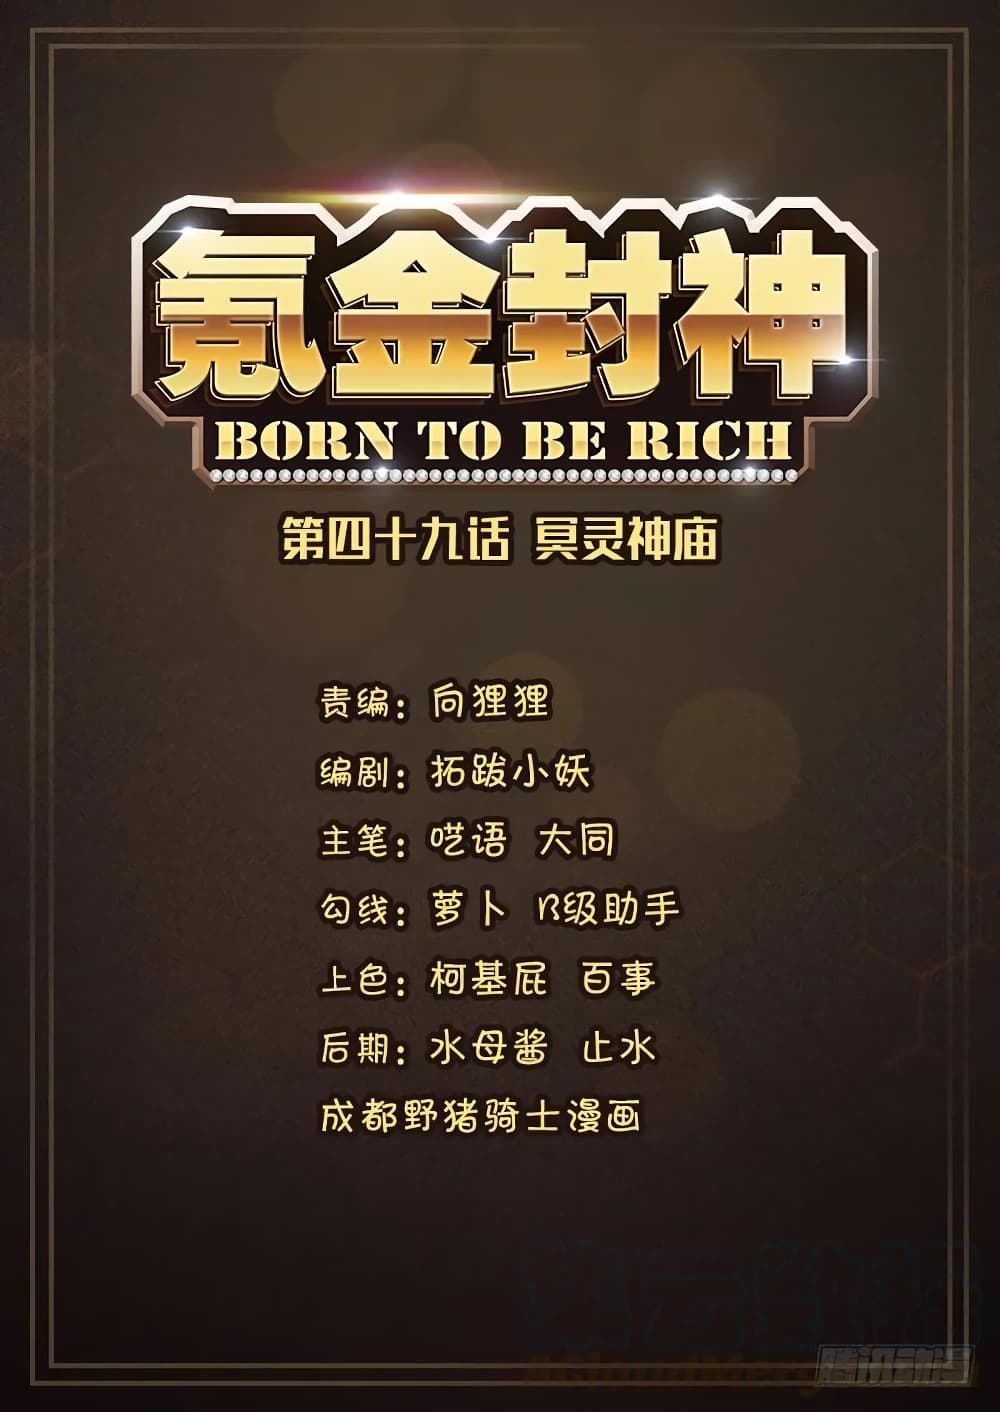 Born To Be Rich 50-50